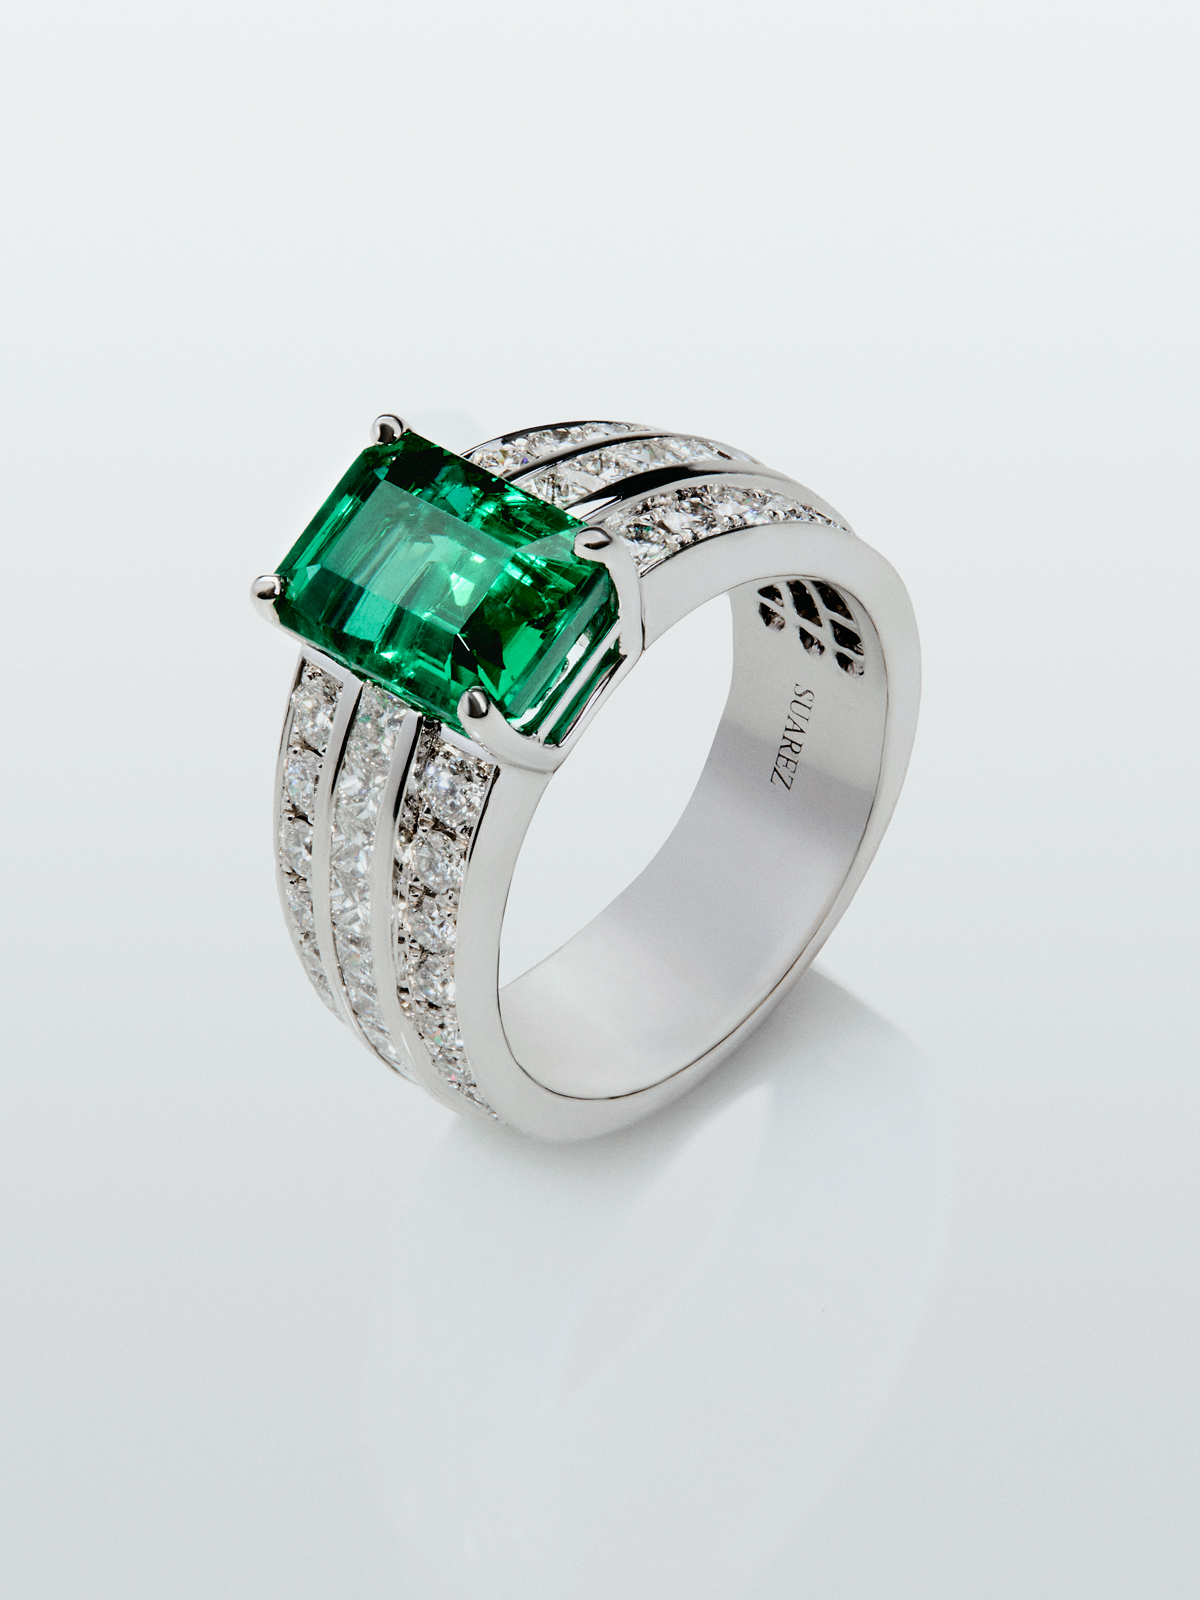 18K white gold ring with octagonal cut emerald of 3.07 cts, 32 brilliant cut diamonds with a total of 0.72 cts and 18 princess cut diamonds with a total of 0.78 cts